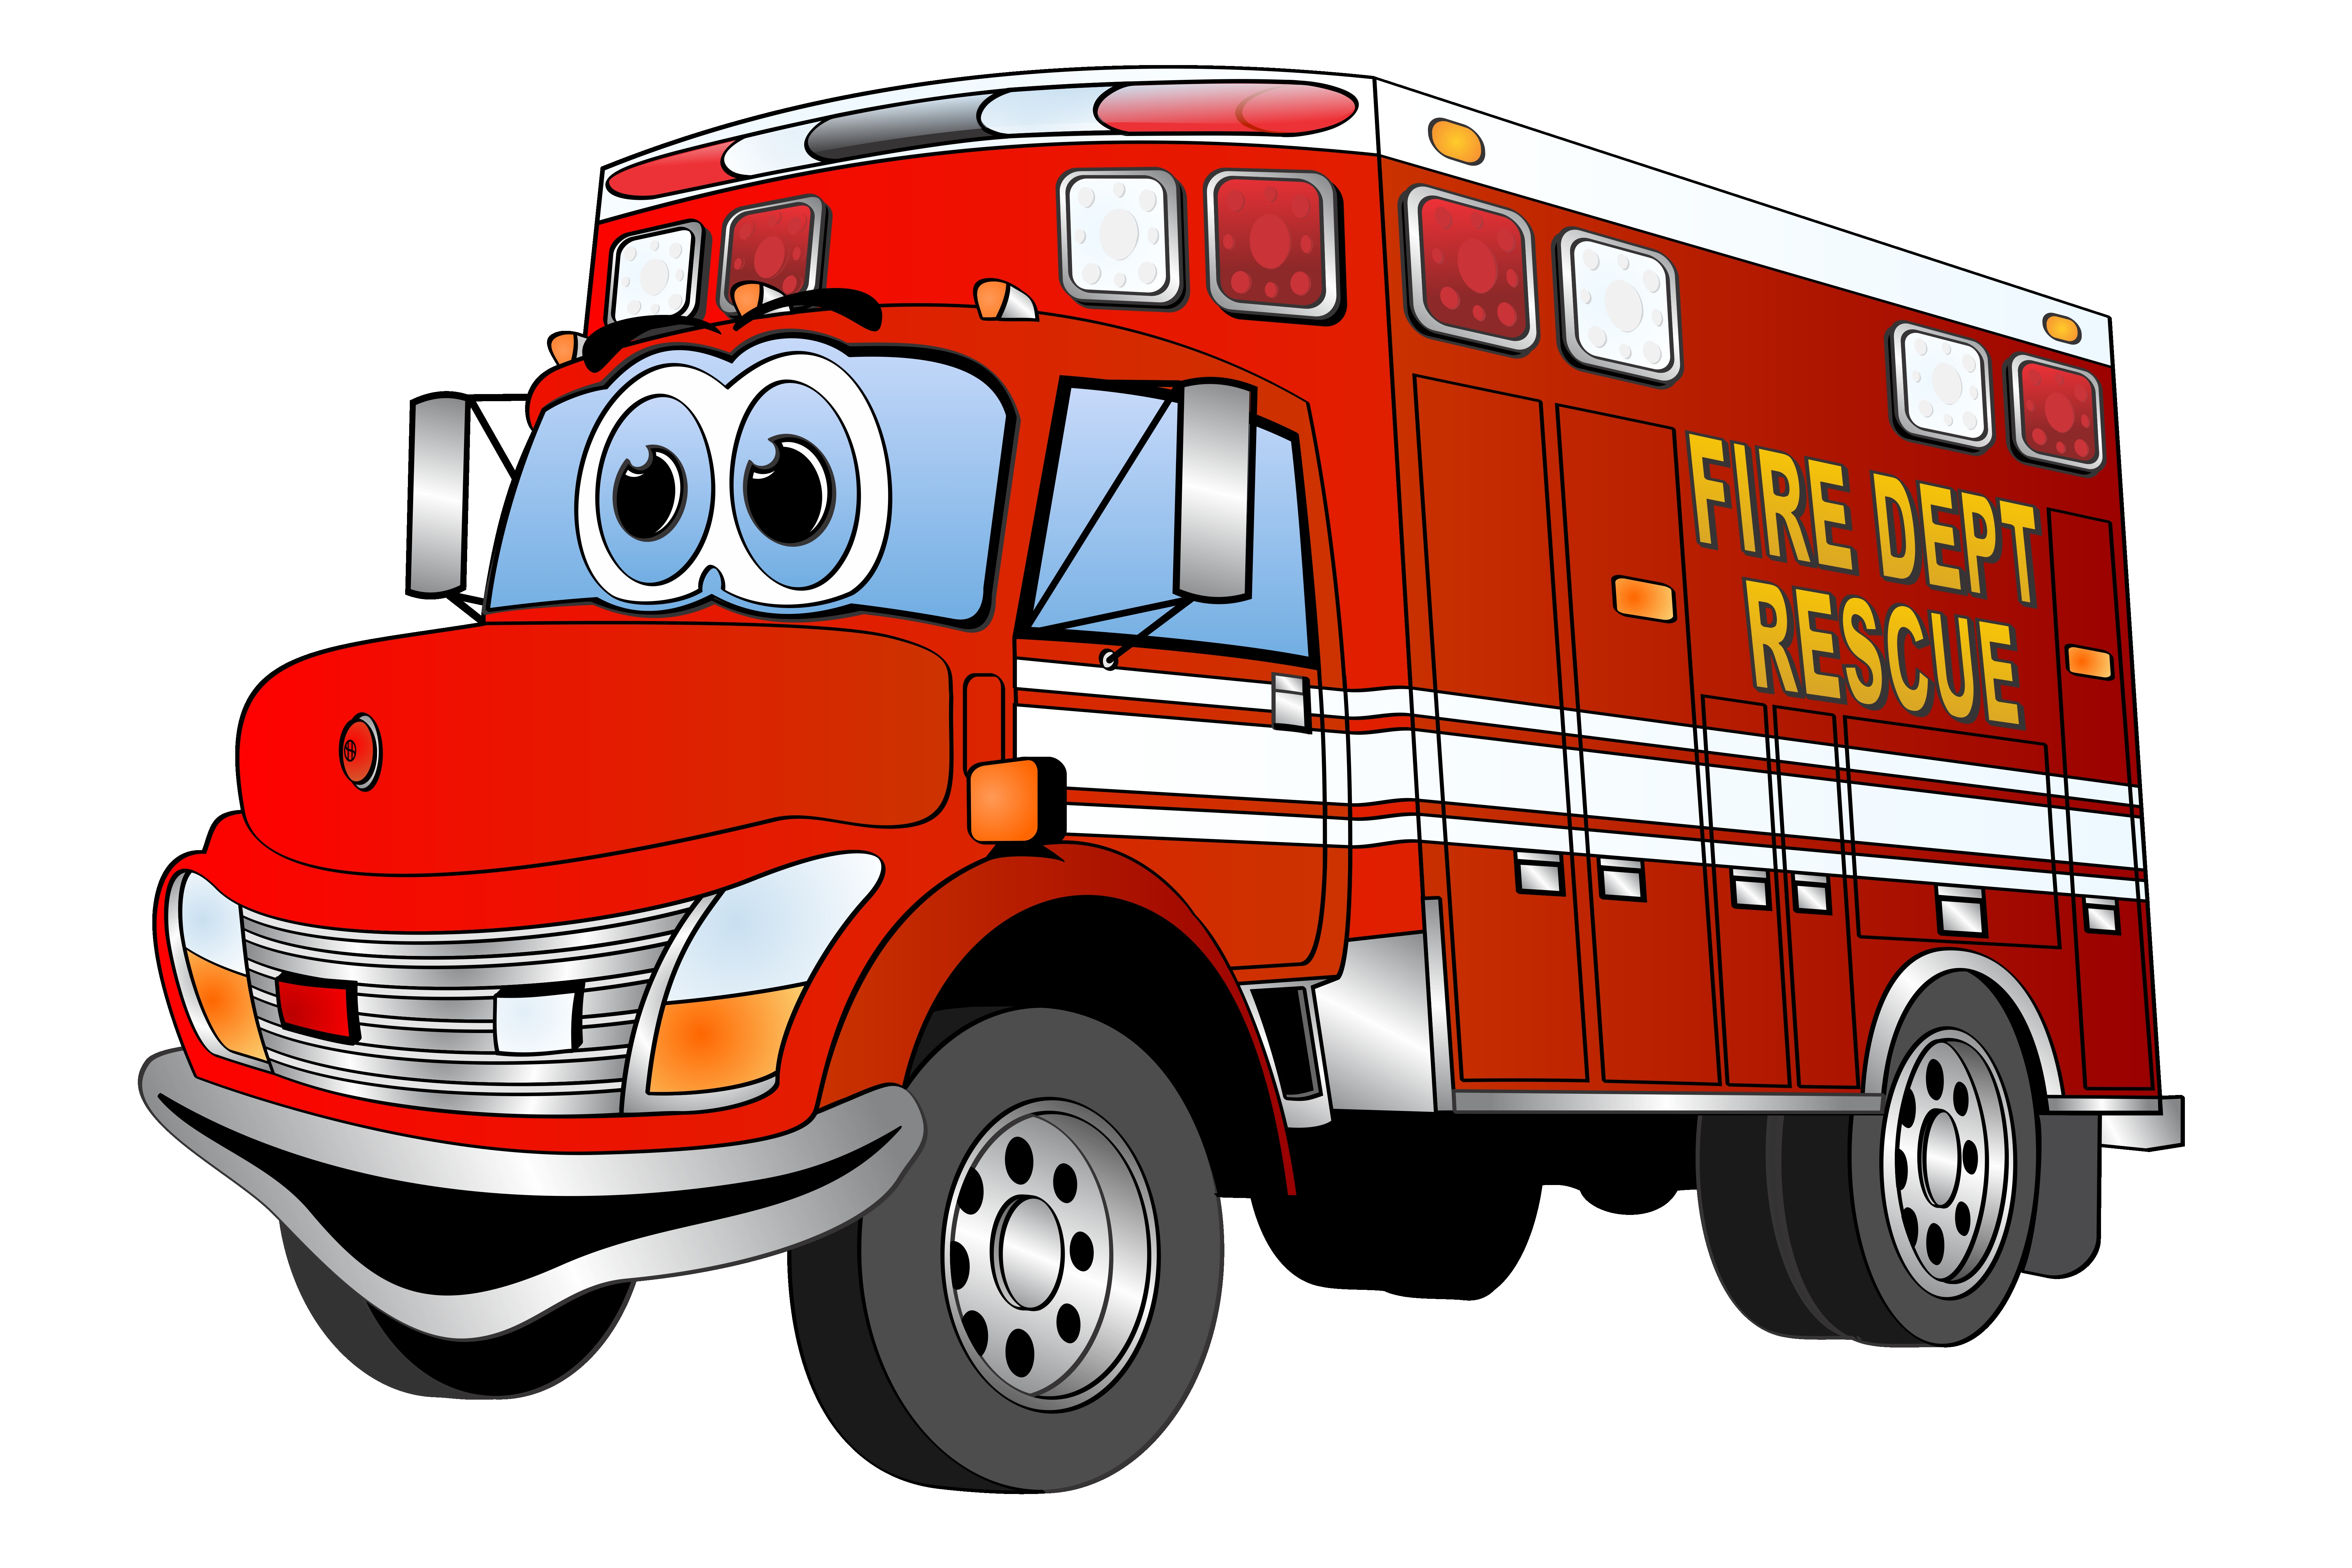 Fire Truck Silhouette Clip Art at GetDrawings Free download.